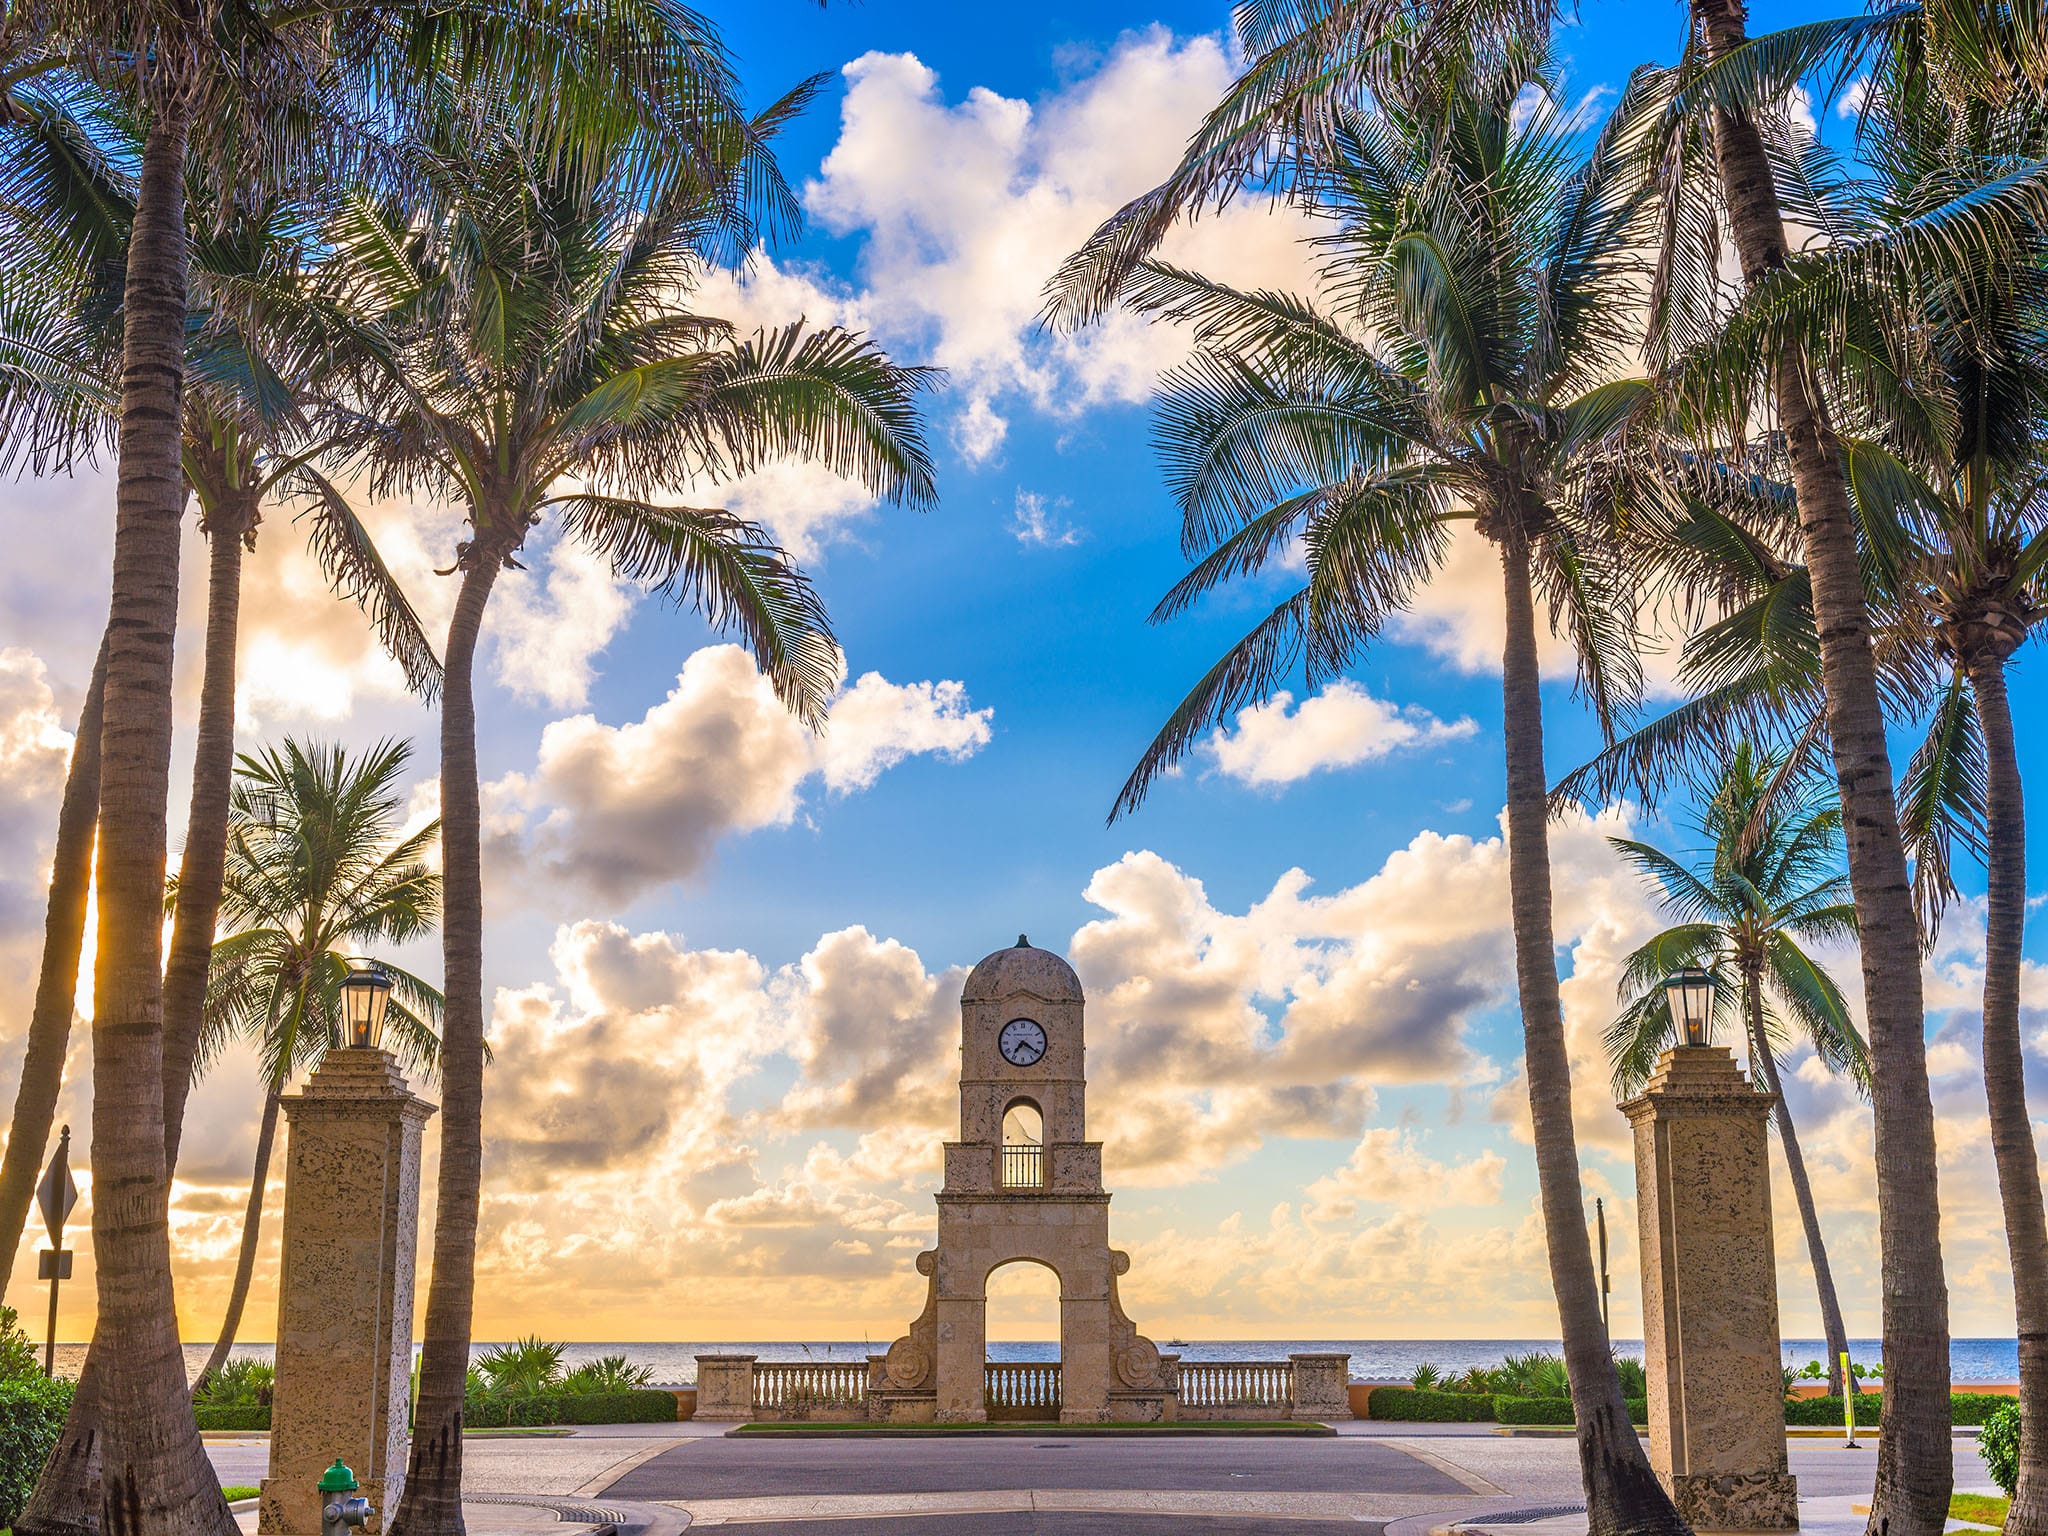 A clock tower framed by palm trees stands against a backdrop of a vibrant partly cloudy sky and the ocean at sunset